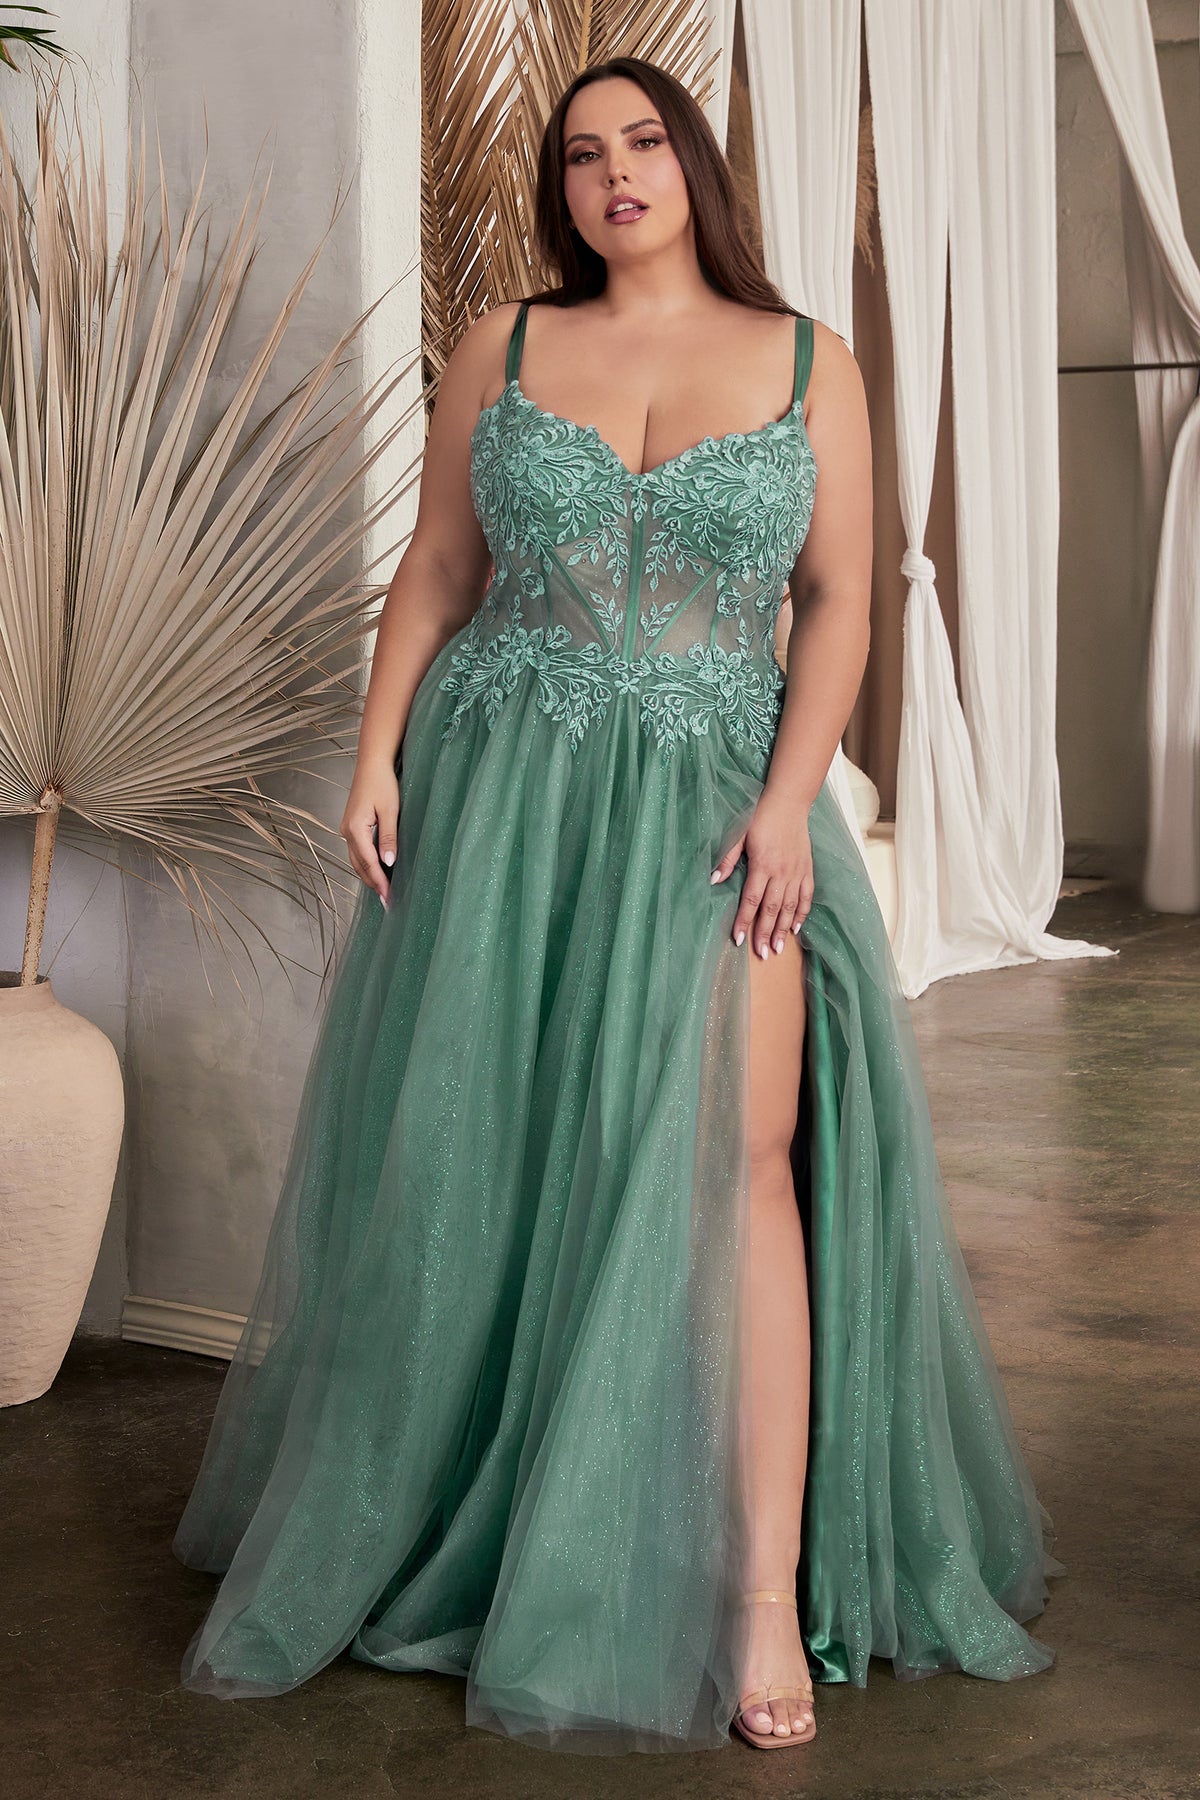 Plus Size Formal Prom Dresses, Evening Gowns  Party dresses with sleeves, Plus  size homecoming dresses, Plus size formal dresses